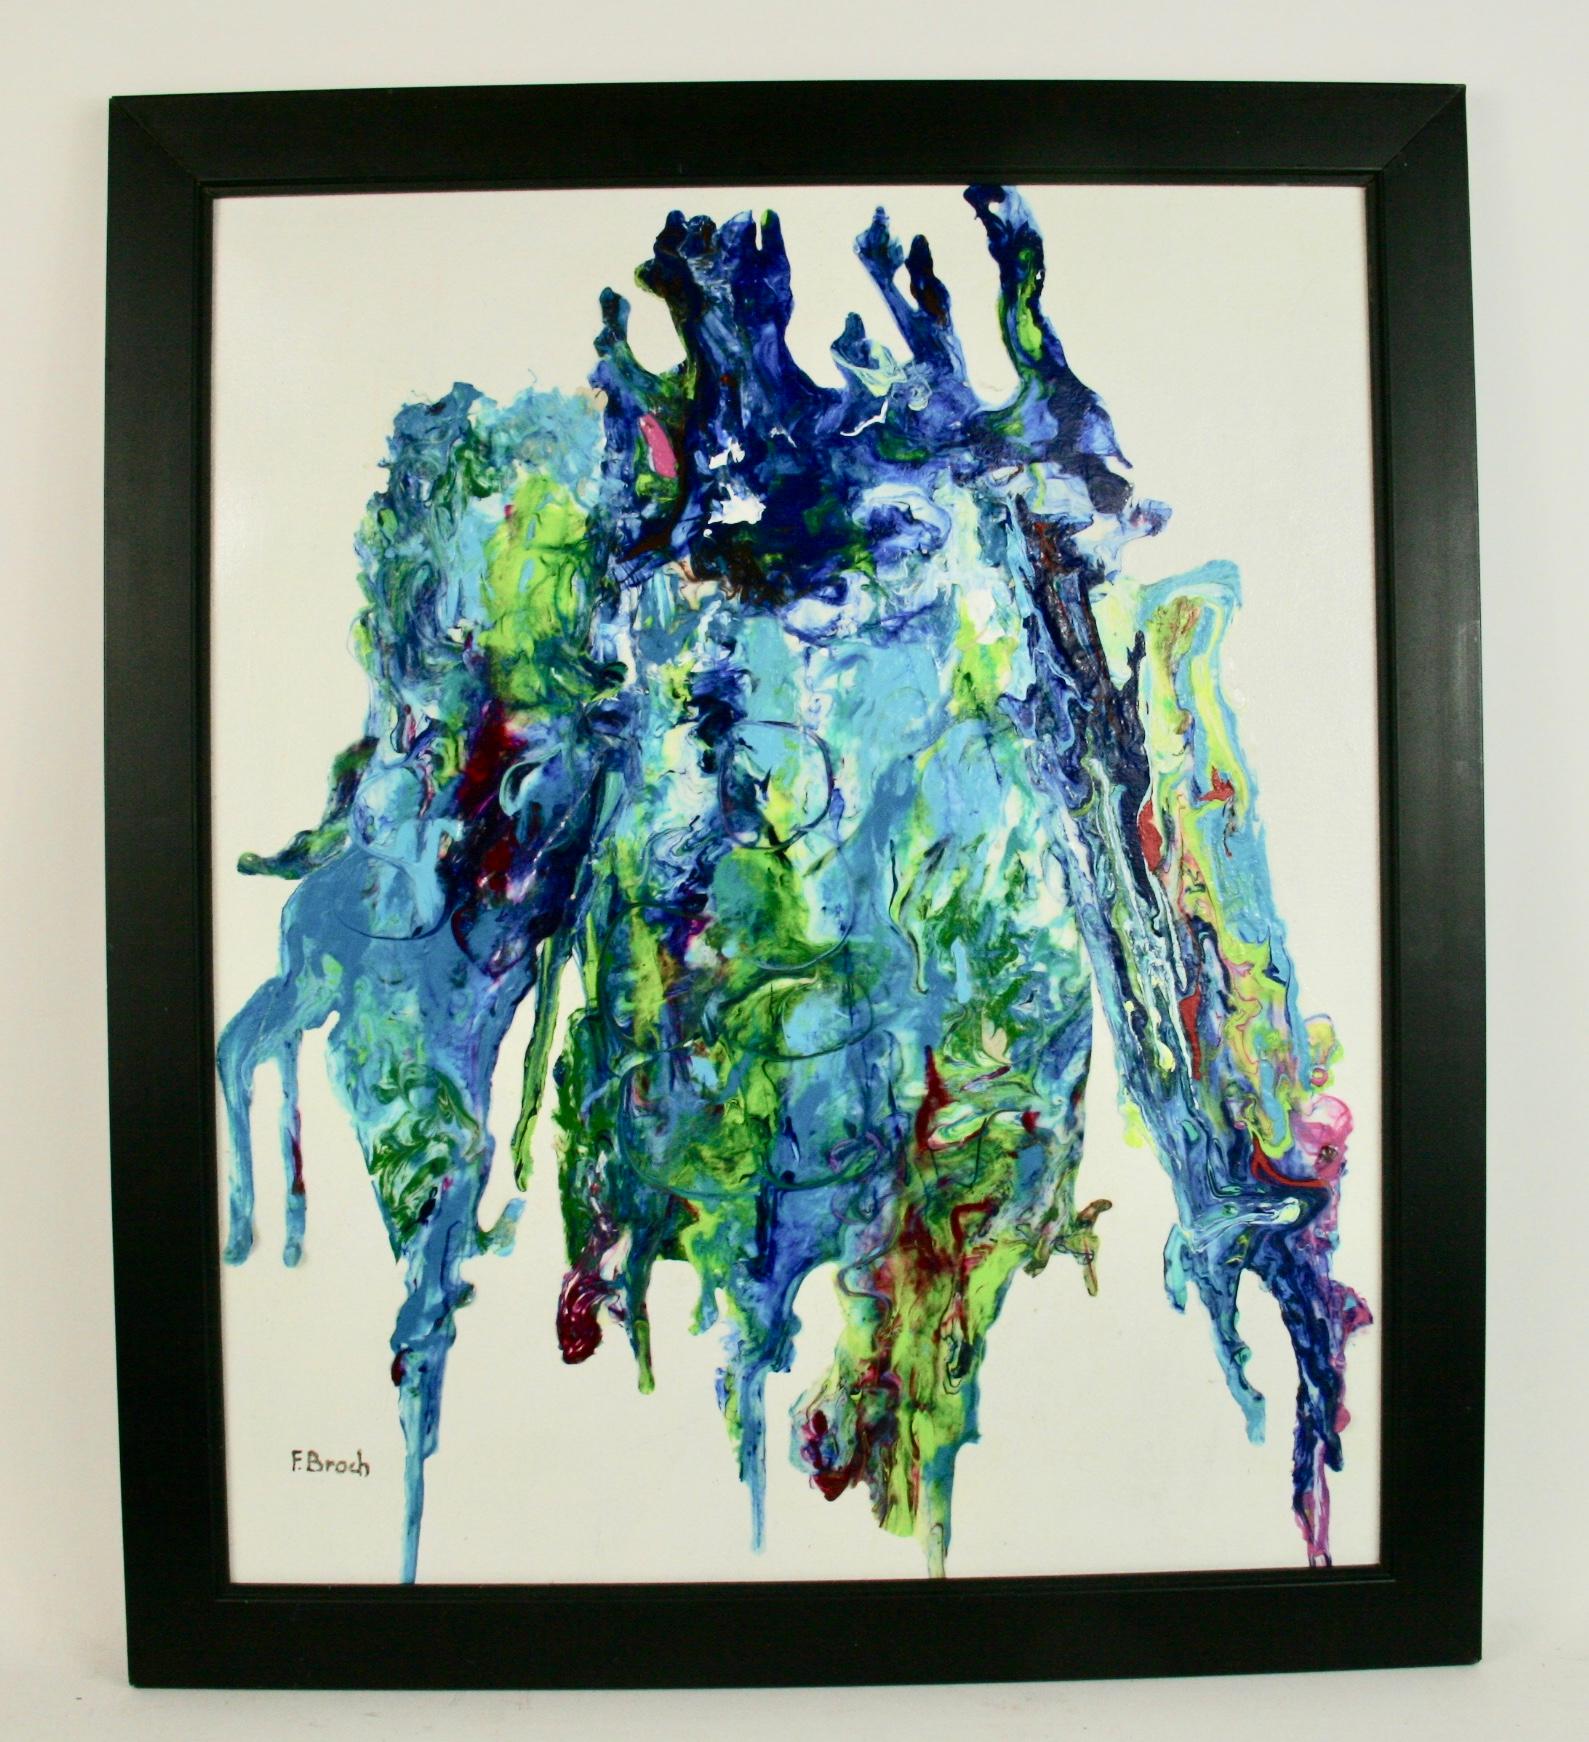 F.Broch Abstract Painting - Blue Abstract